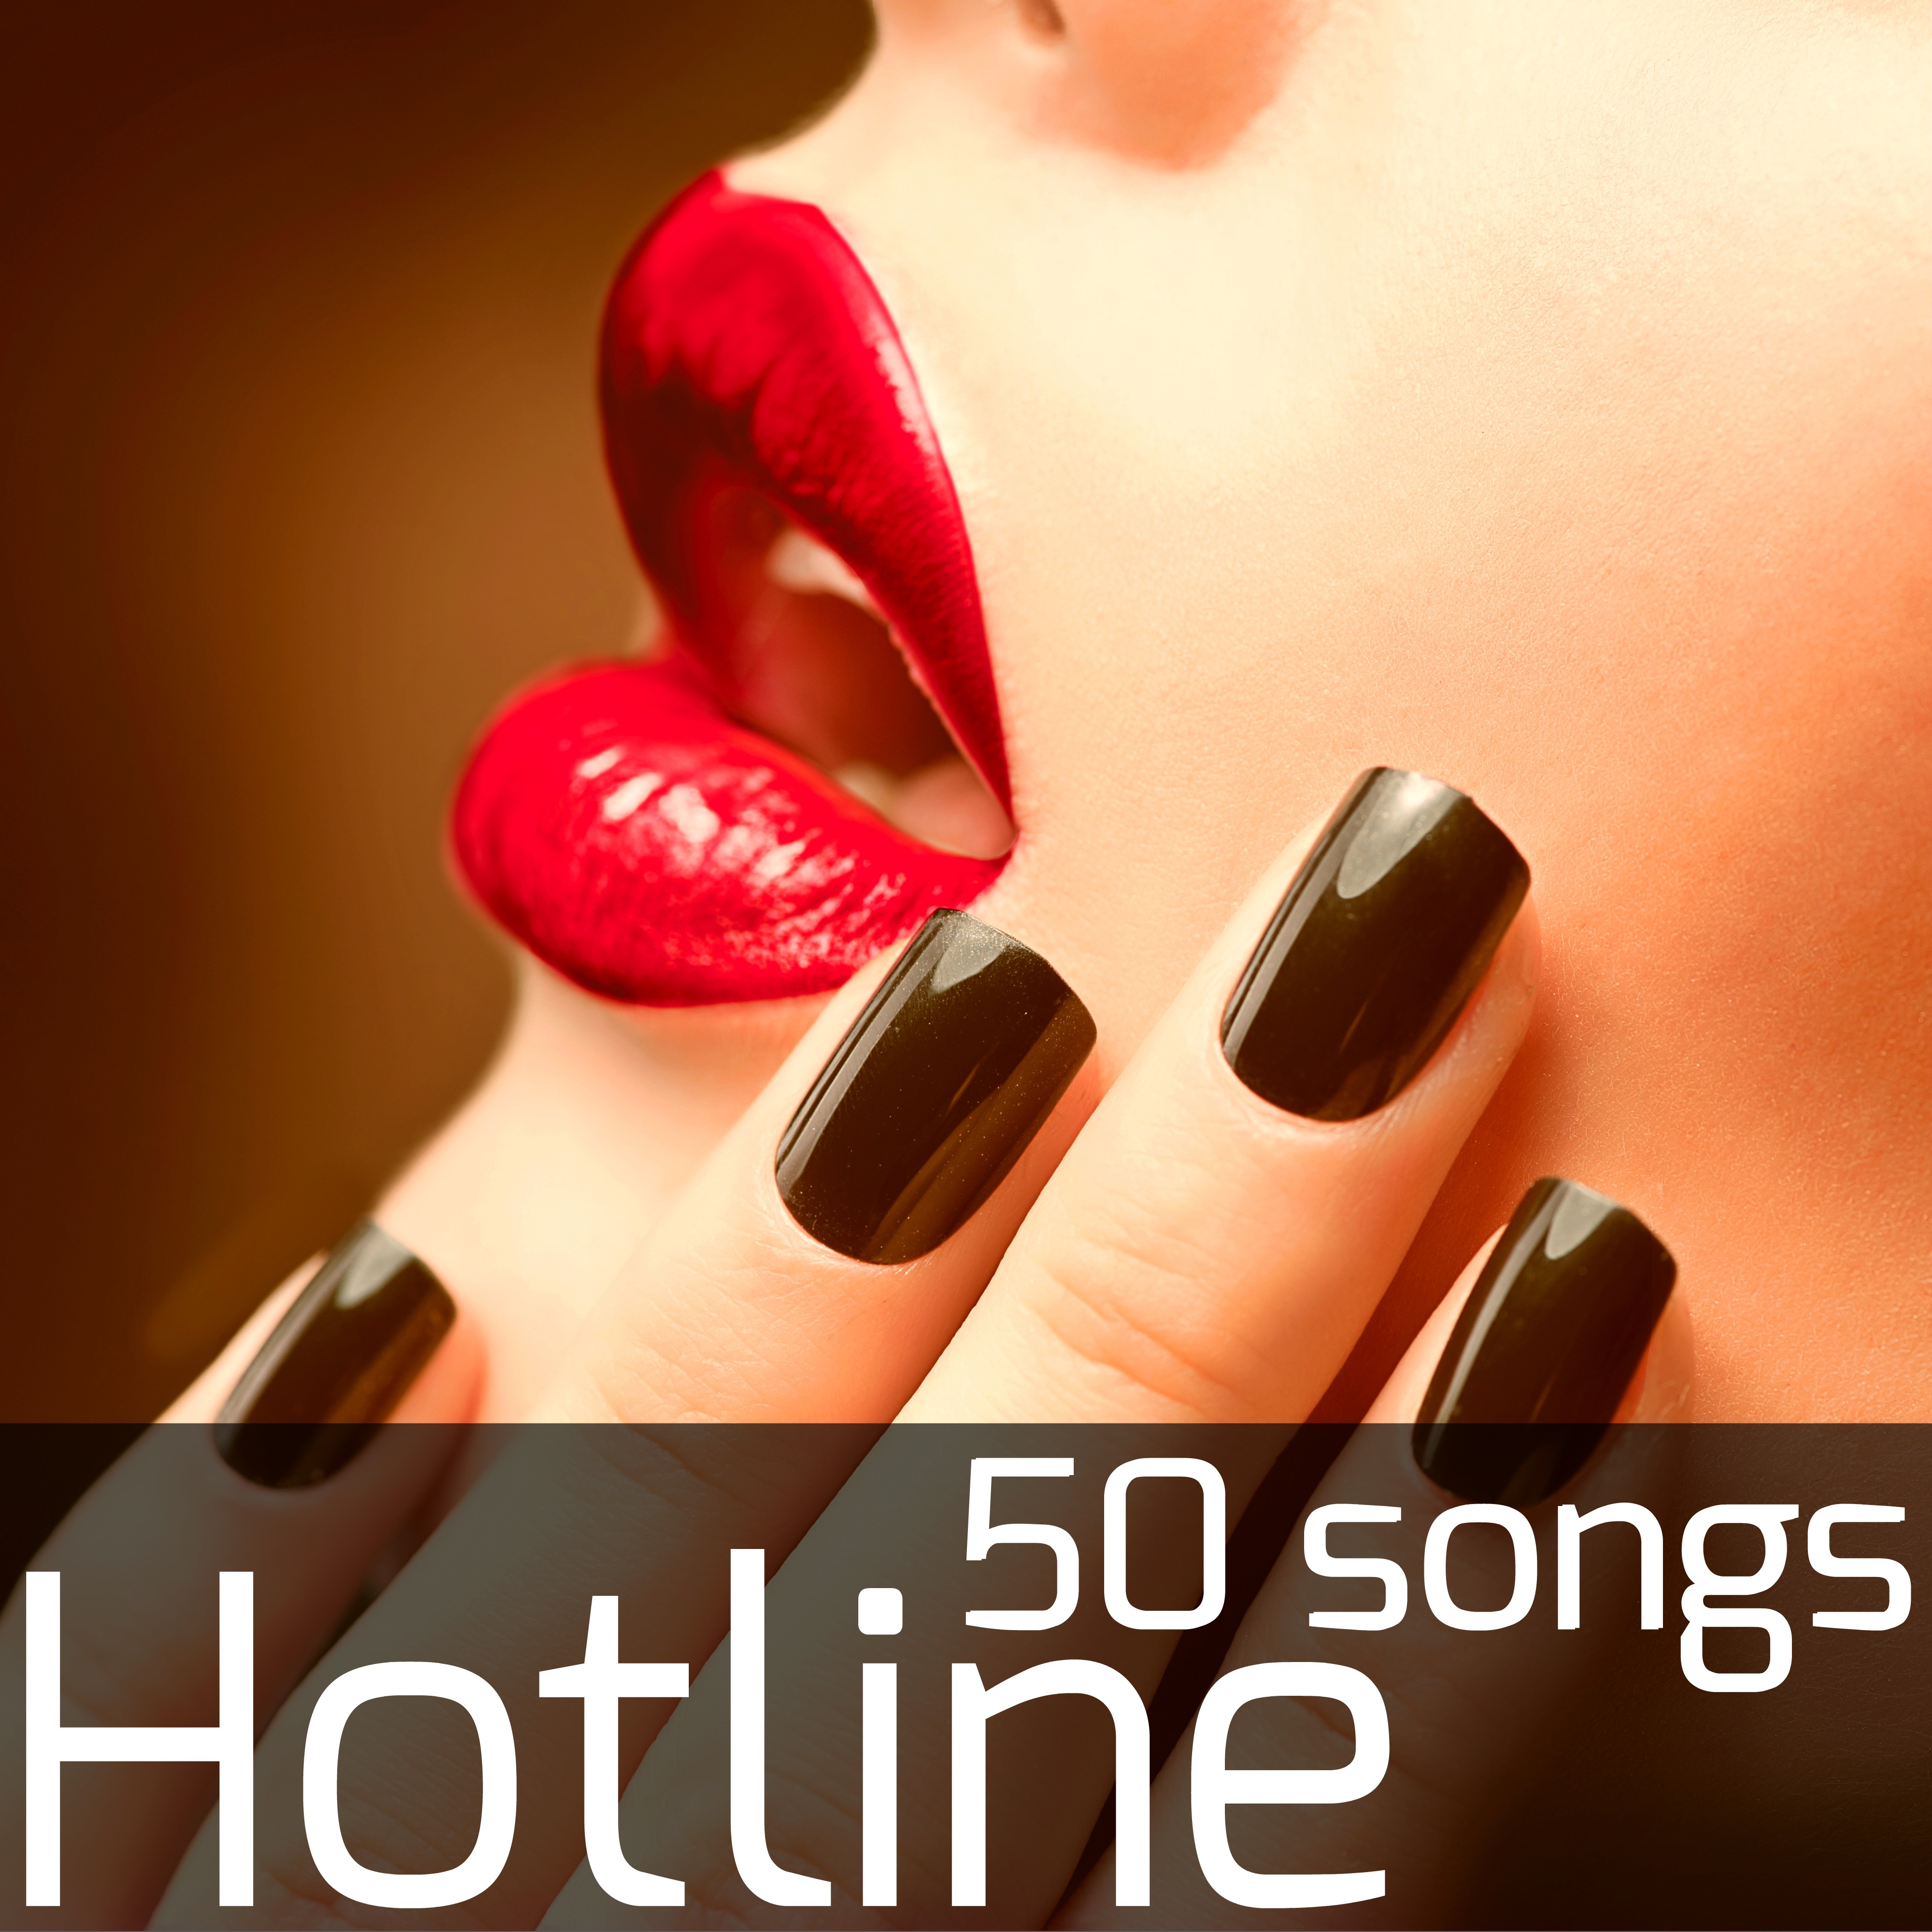 Hotline 50 Songs - **** Music Collection, Hot Moments Background & **** Ladies Bikini Beach Party Music